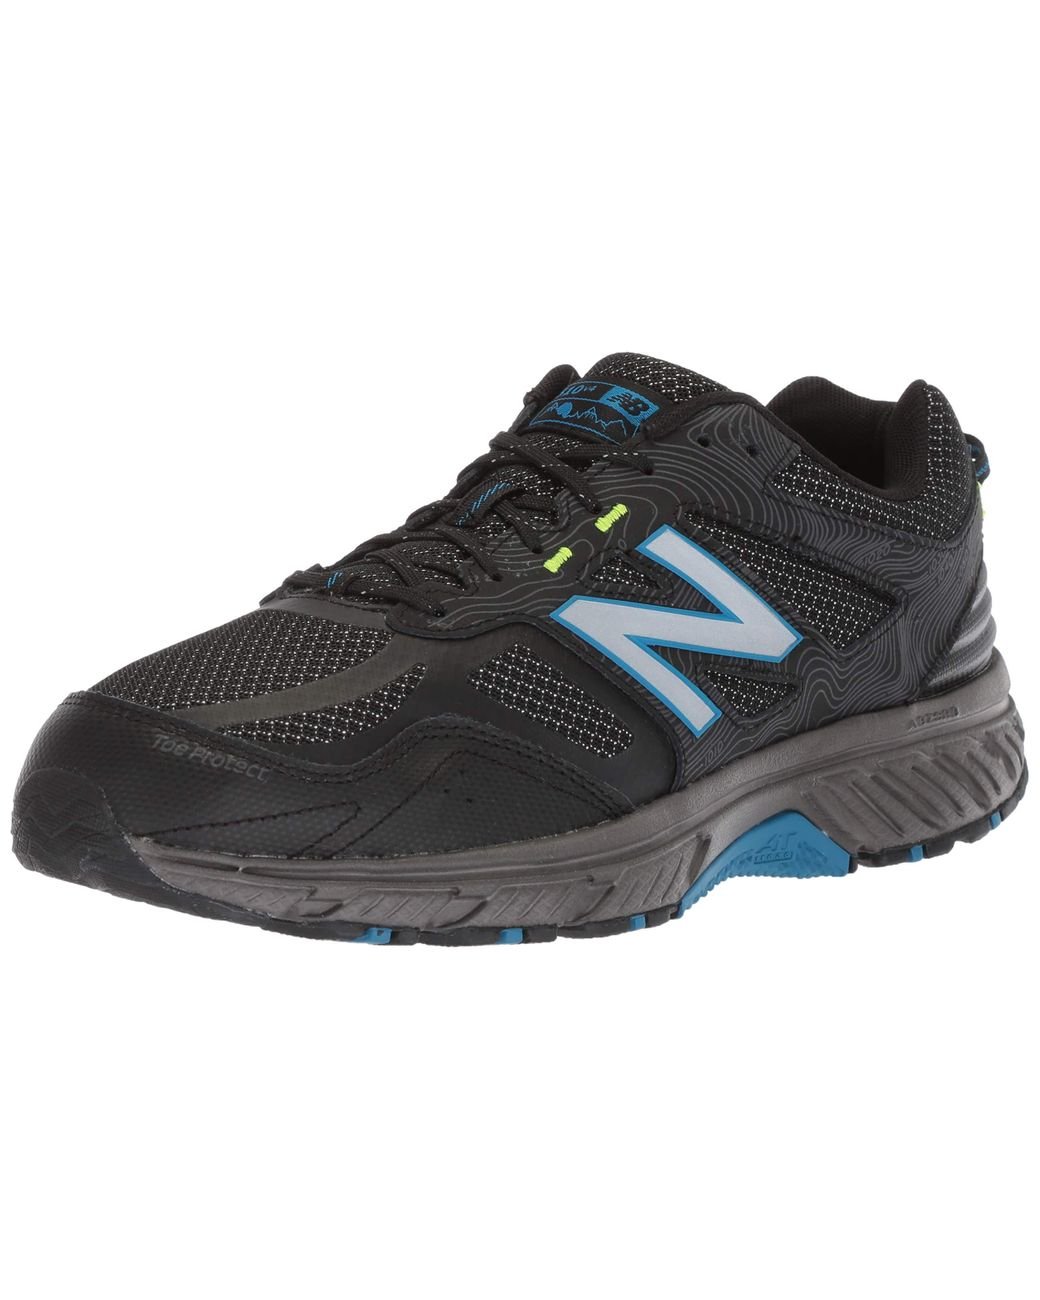 New Balance Leather 510 V4 Trail Running Shoe in Black for Men - Save ...